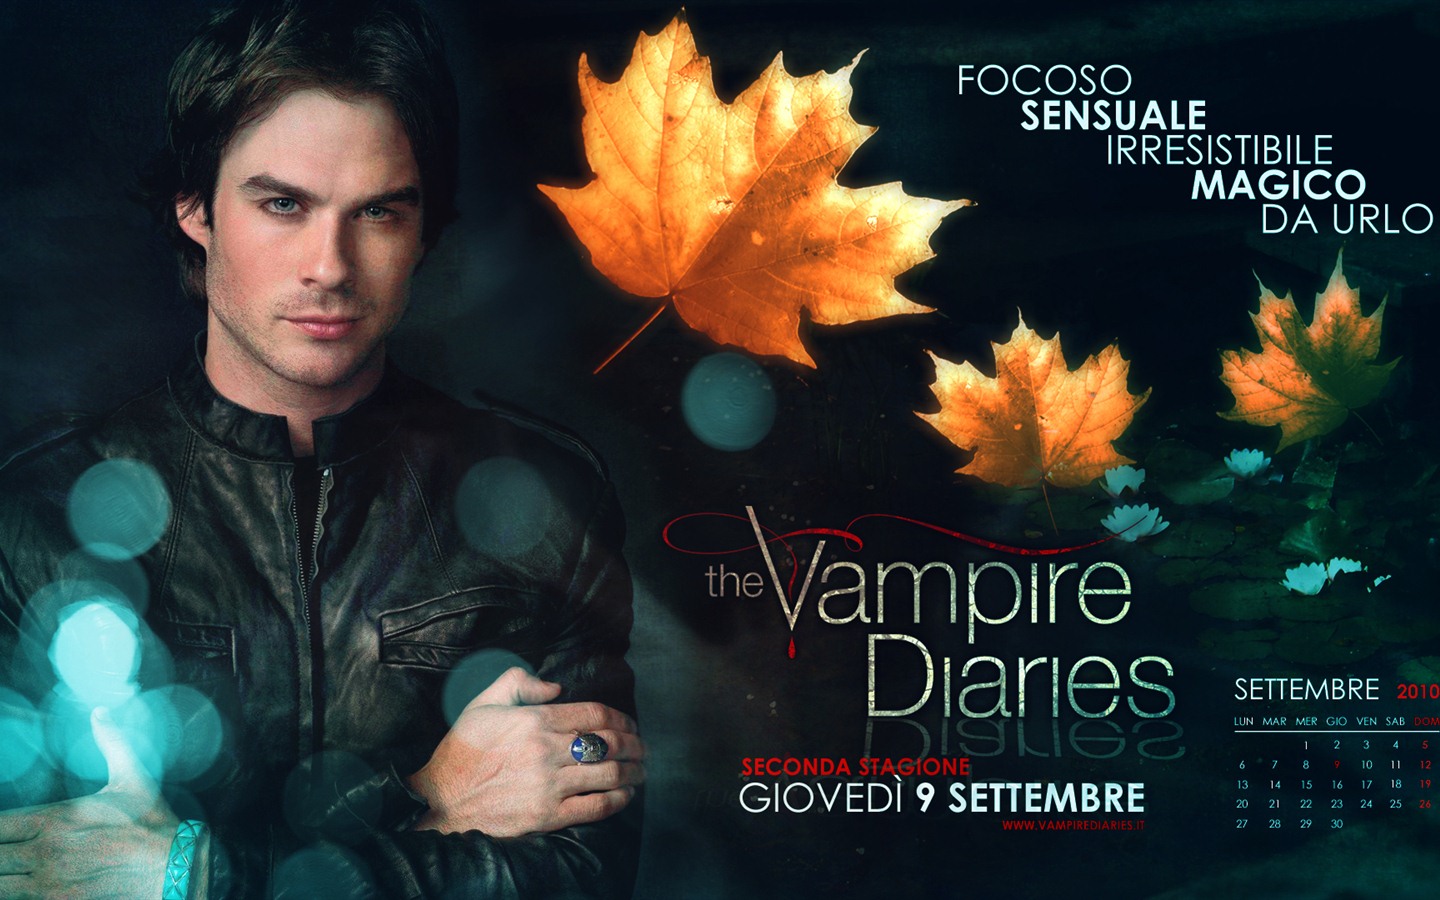 The Vampire Diaries HD Wallpapers #16 - 1440x900